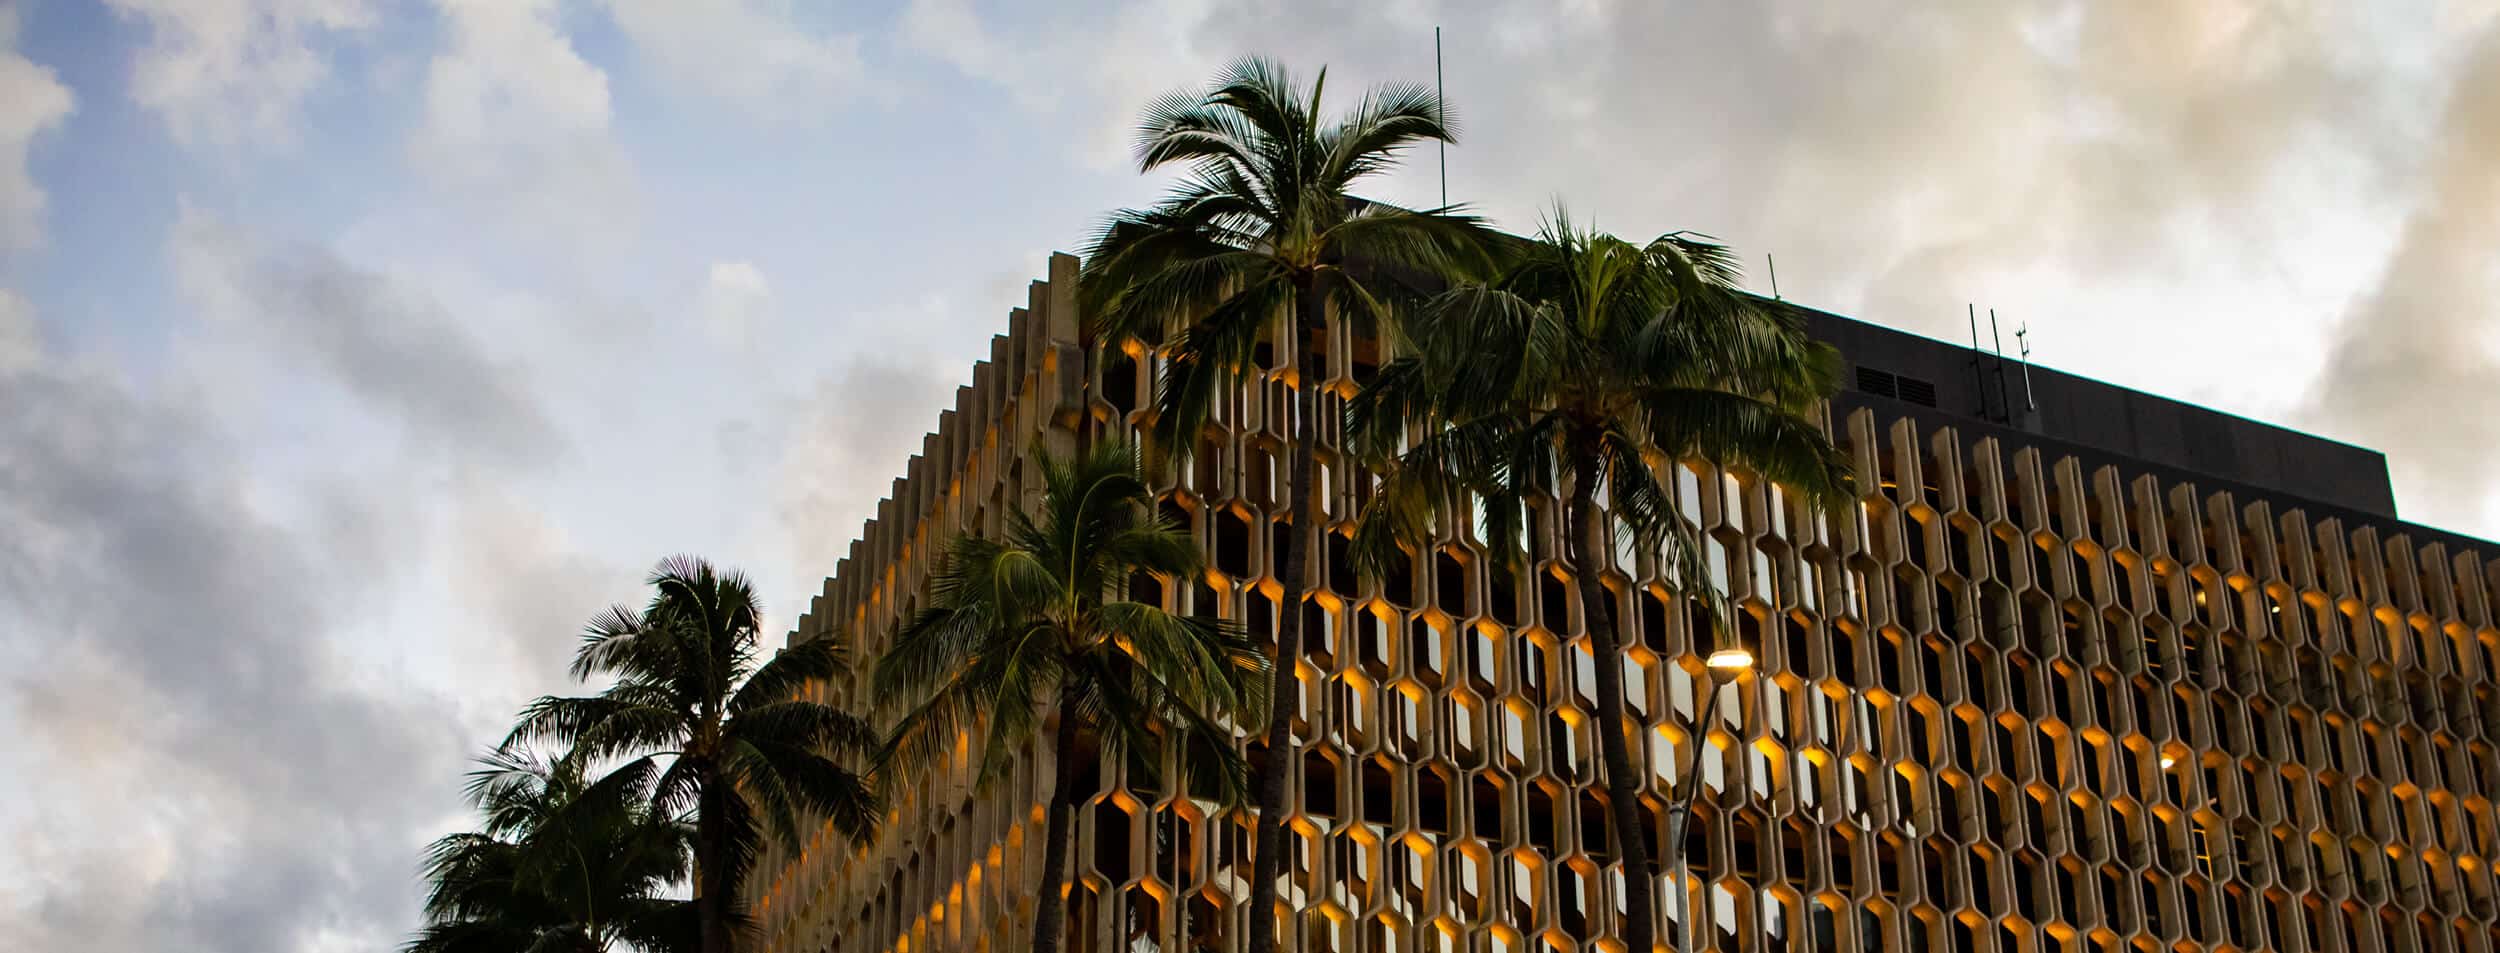 The historic IBM Building facade set against a sunset sky and surrounding palm trees.